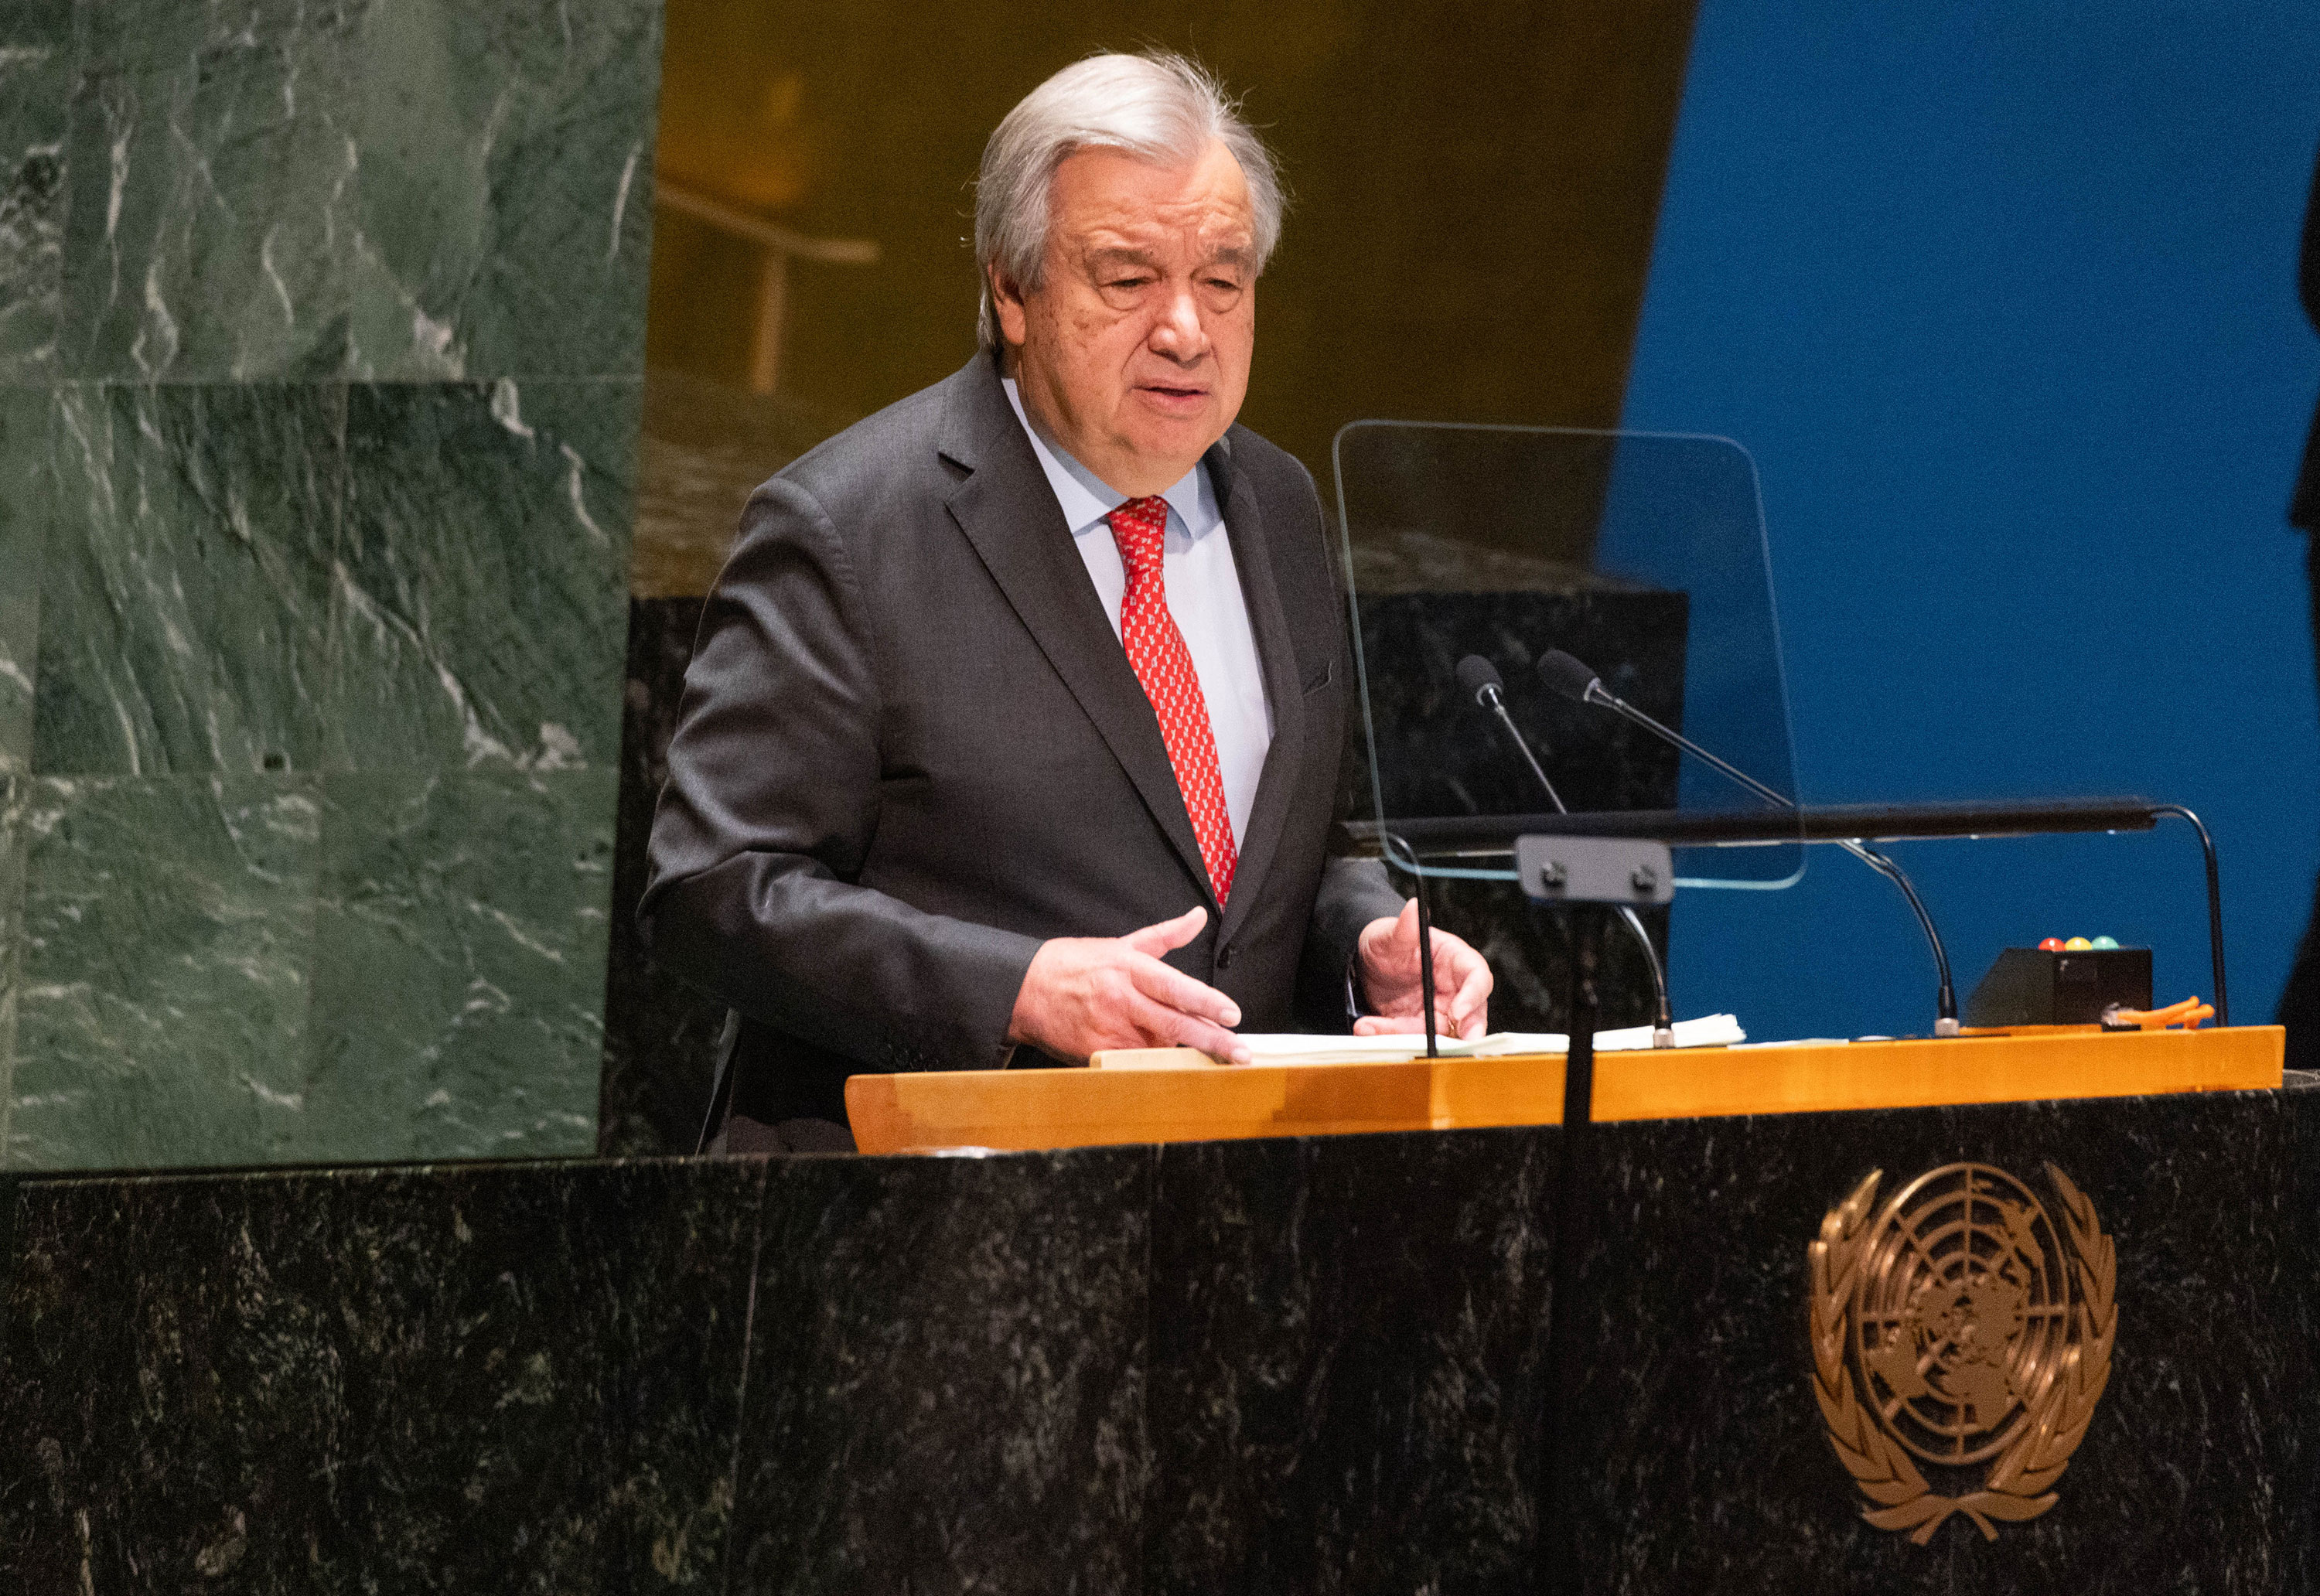 United Nations Secretary General António Guterres speaks at the UN General Assembly in New York on February 7. 